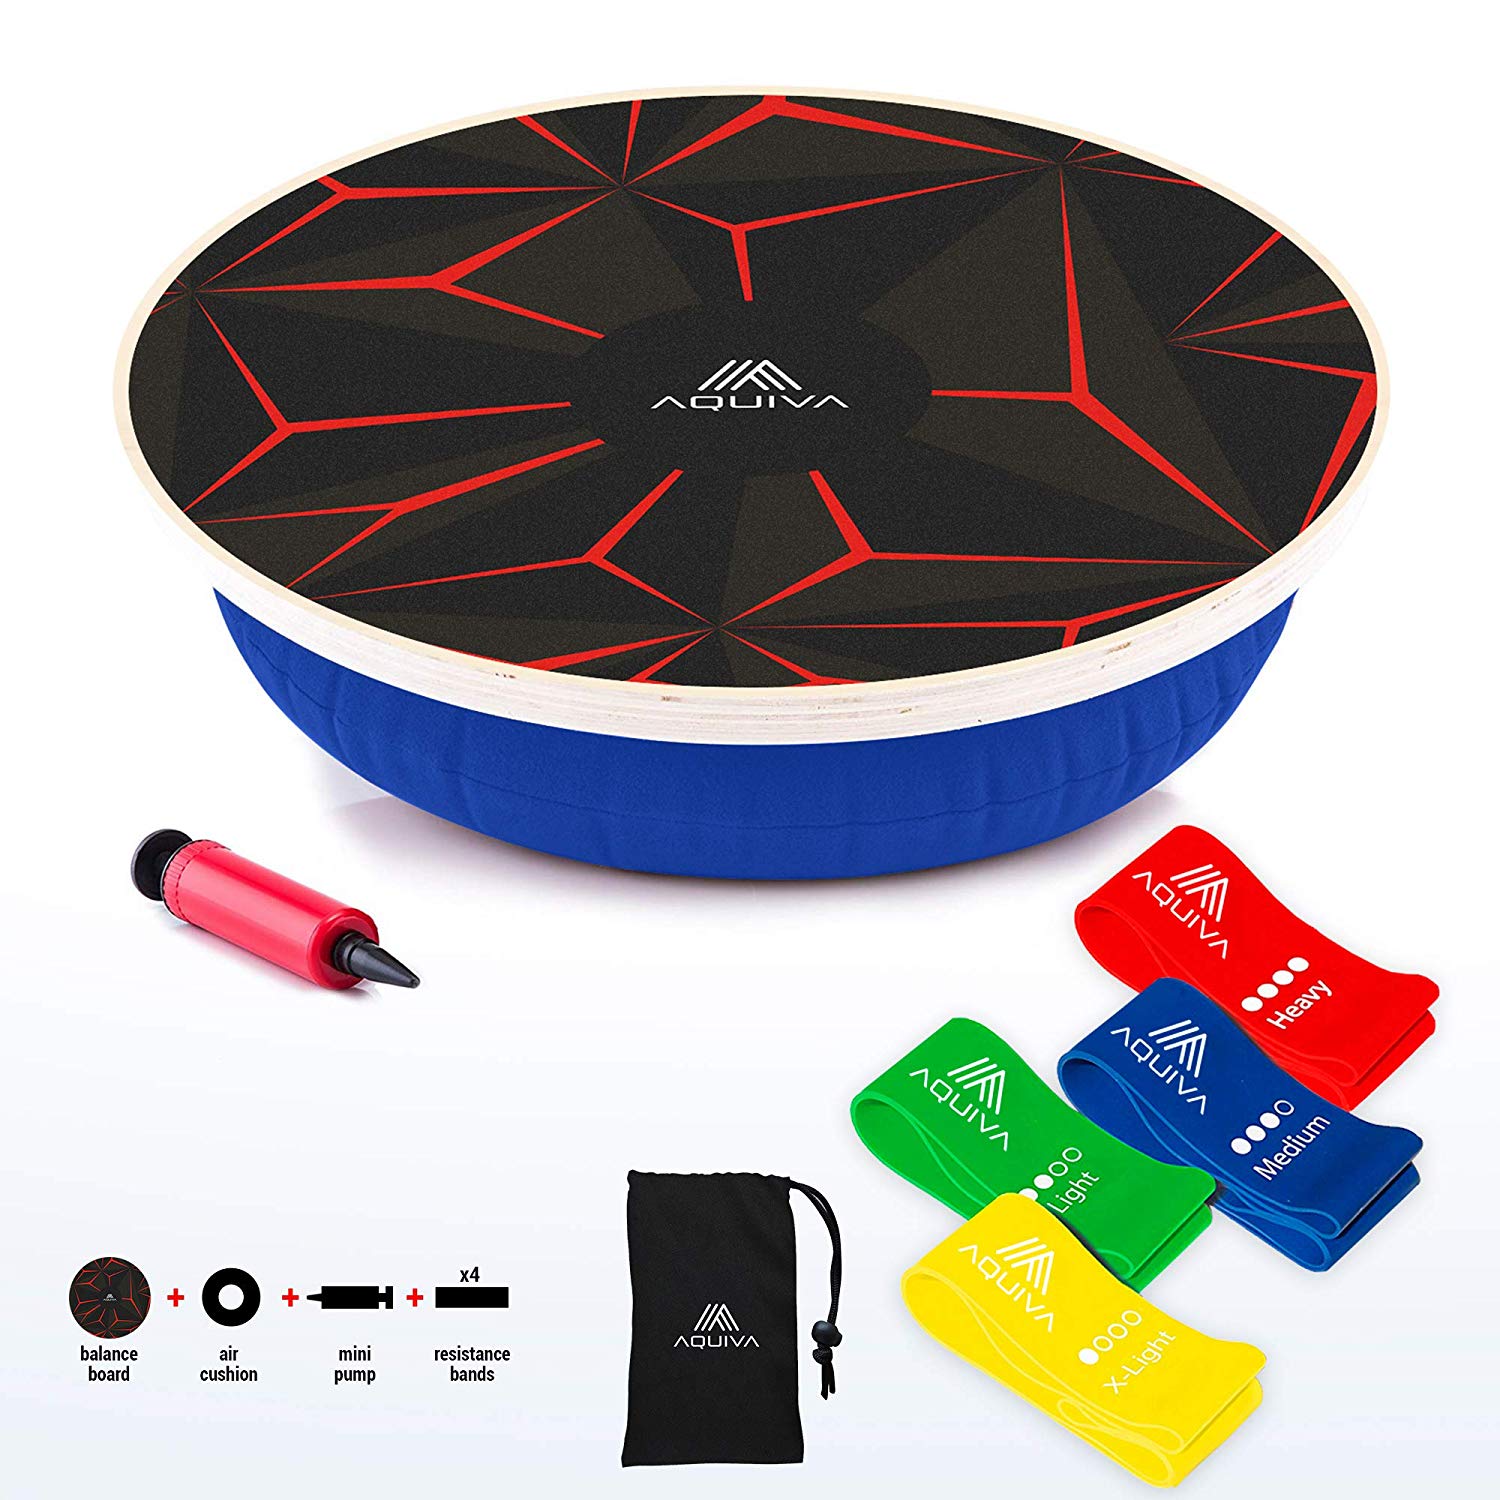 AQUIVA Wooden Wobble Balance Board 15.5" + Air Cushion for Kids and Beginners + Resistance Loop Bands 